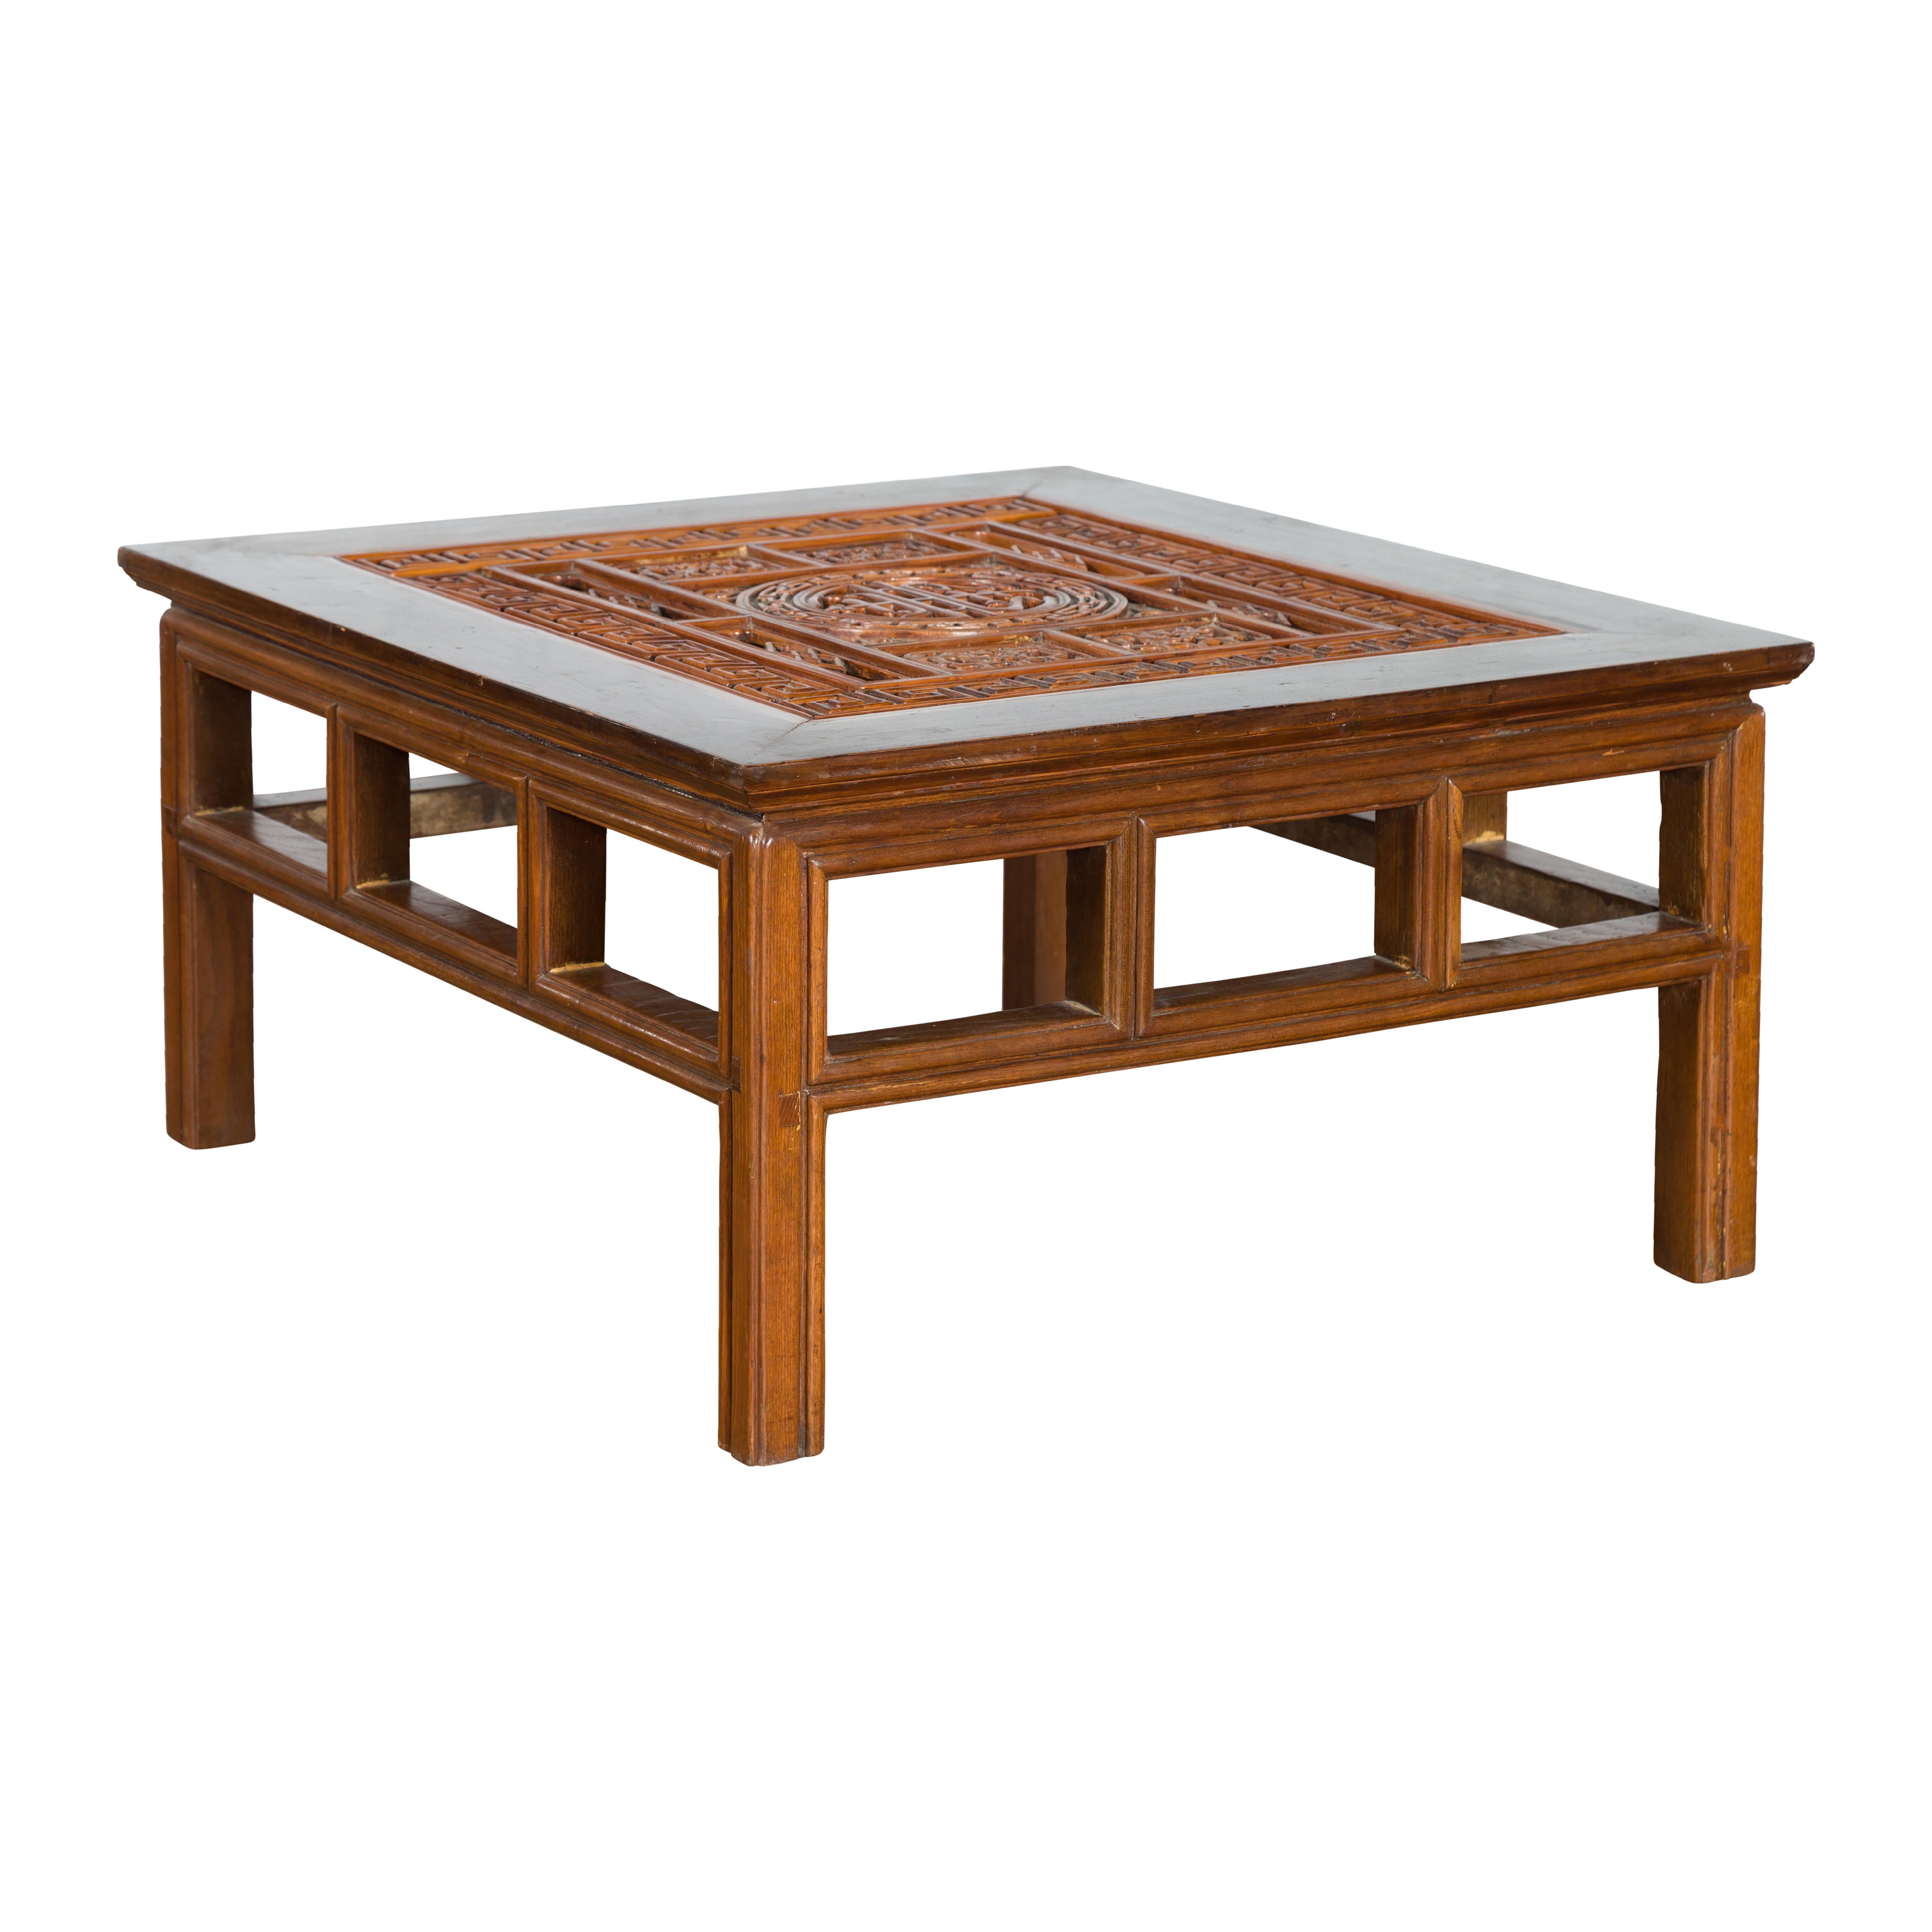 Chinese Qing Dynasty Period 19th Century Coffee Table with Carved Fretwork Top For Sale 12